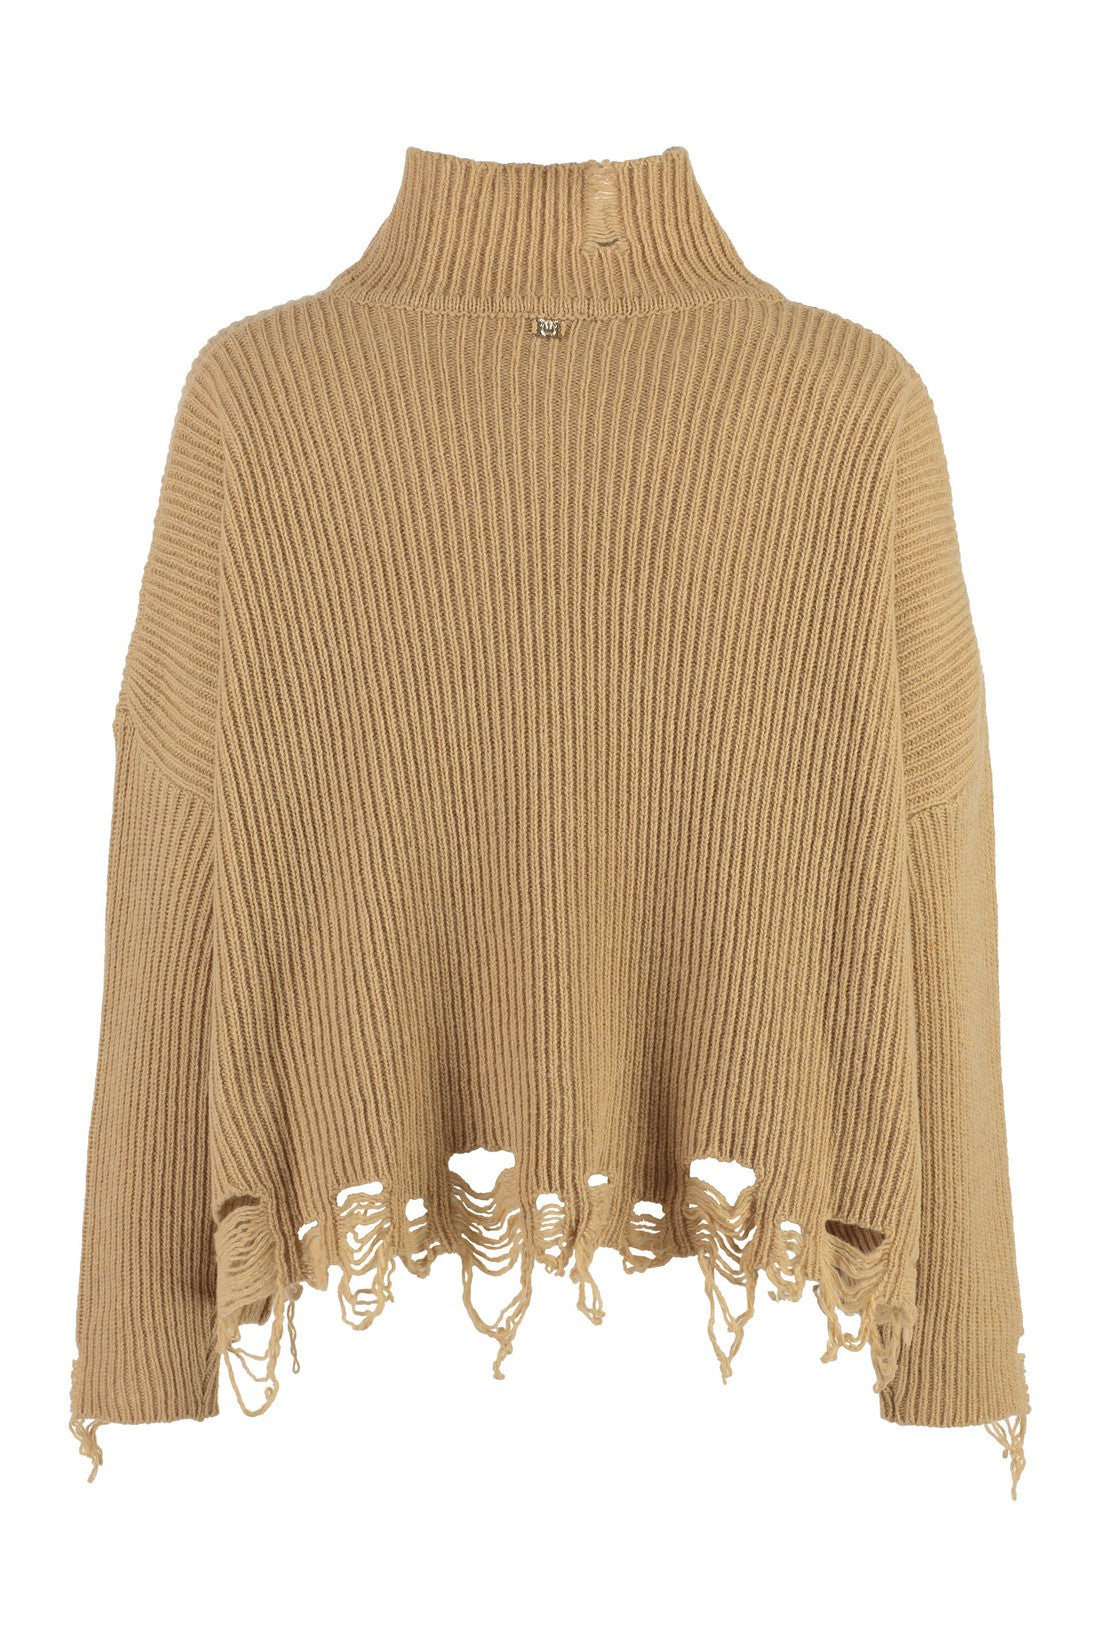 Pinko-OUTLET-SALE-Chitone turtleneck sweater-ARCHIVIST